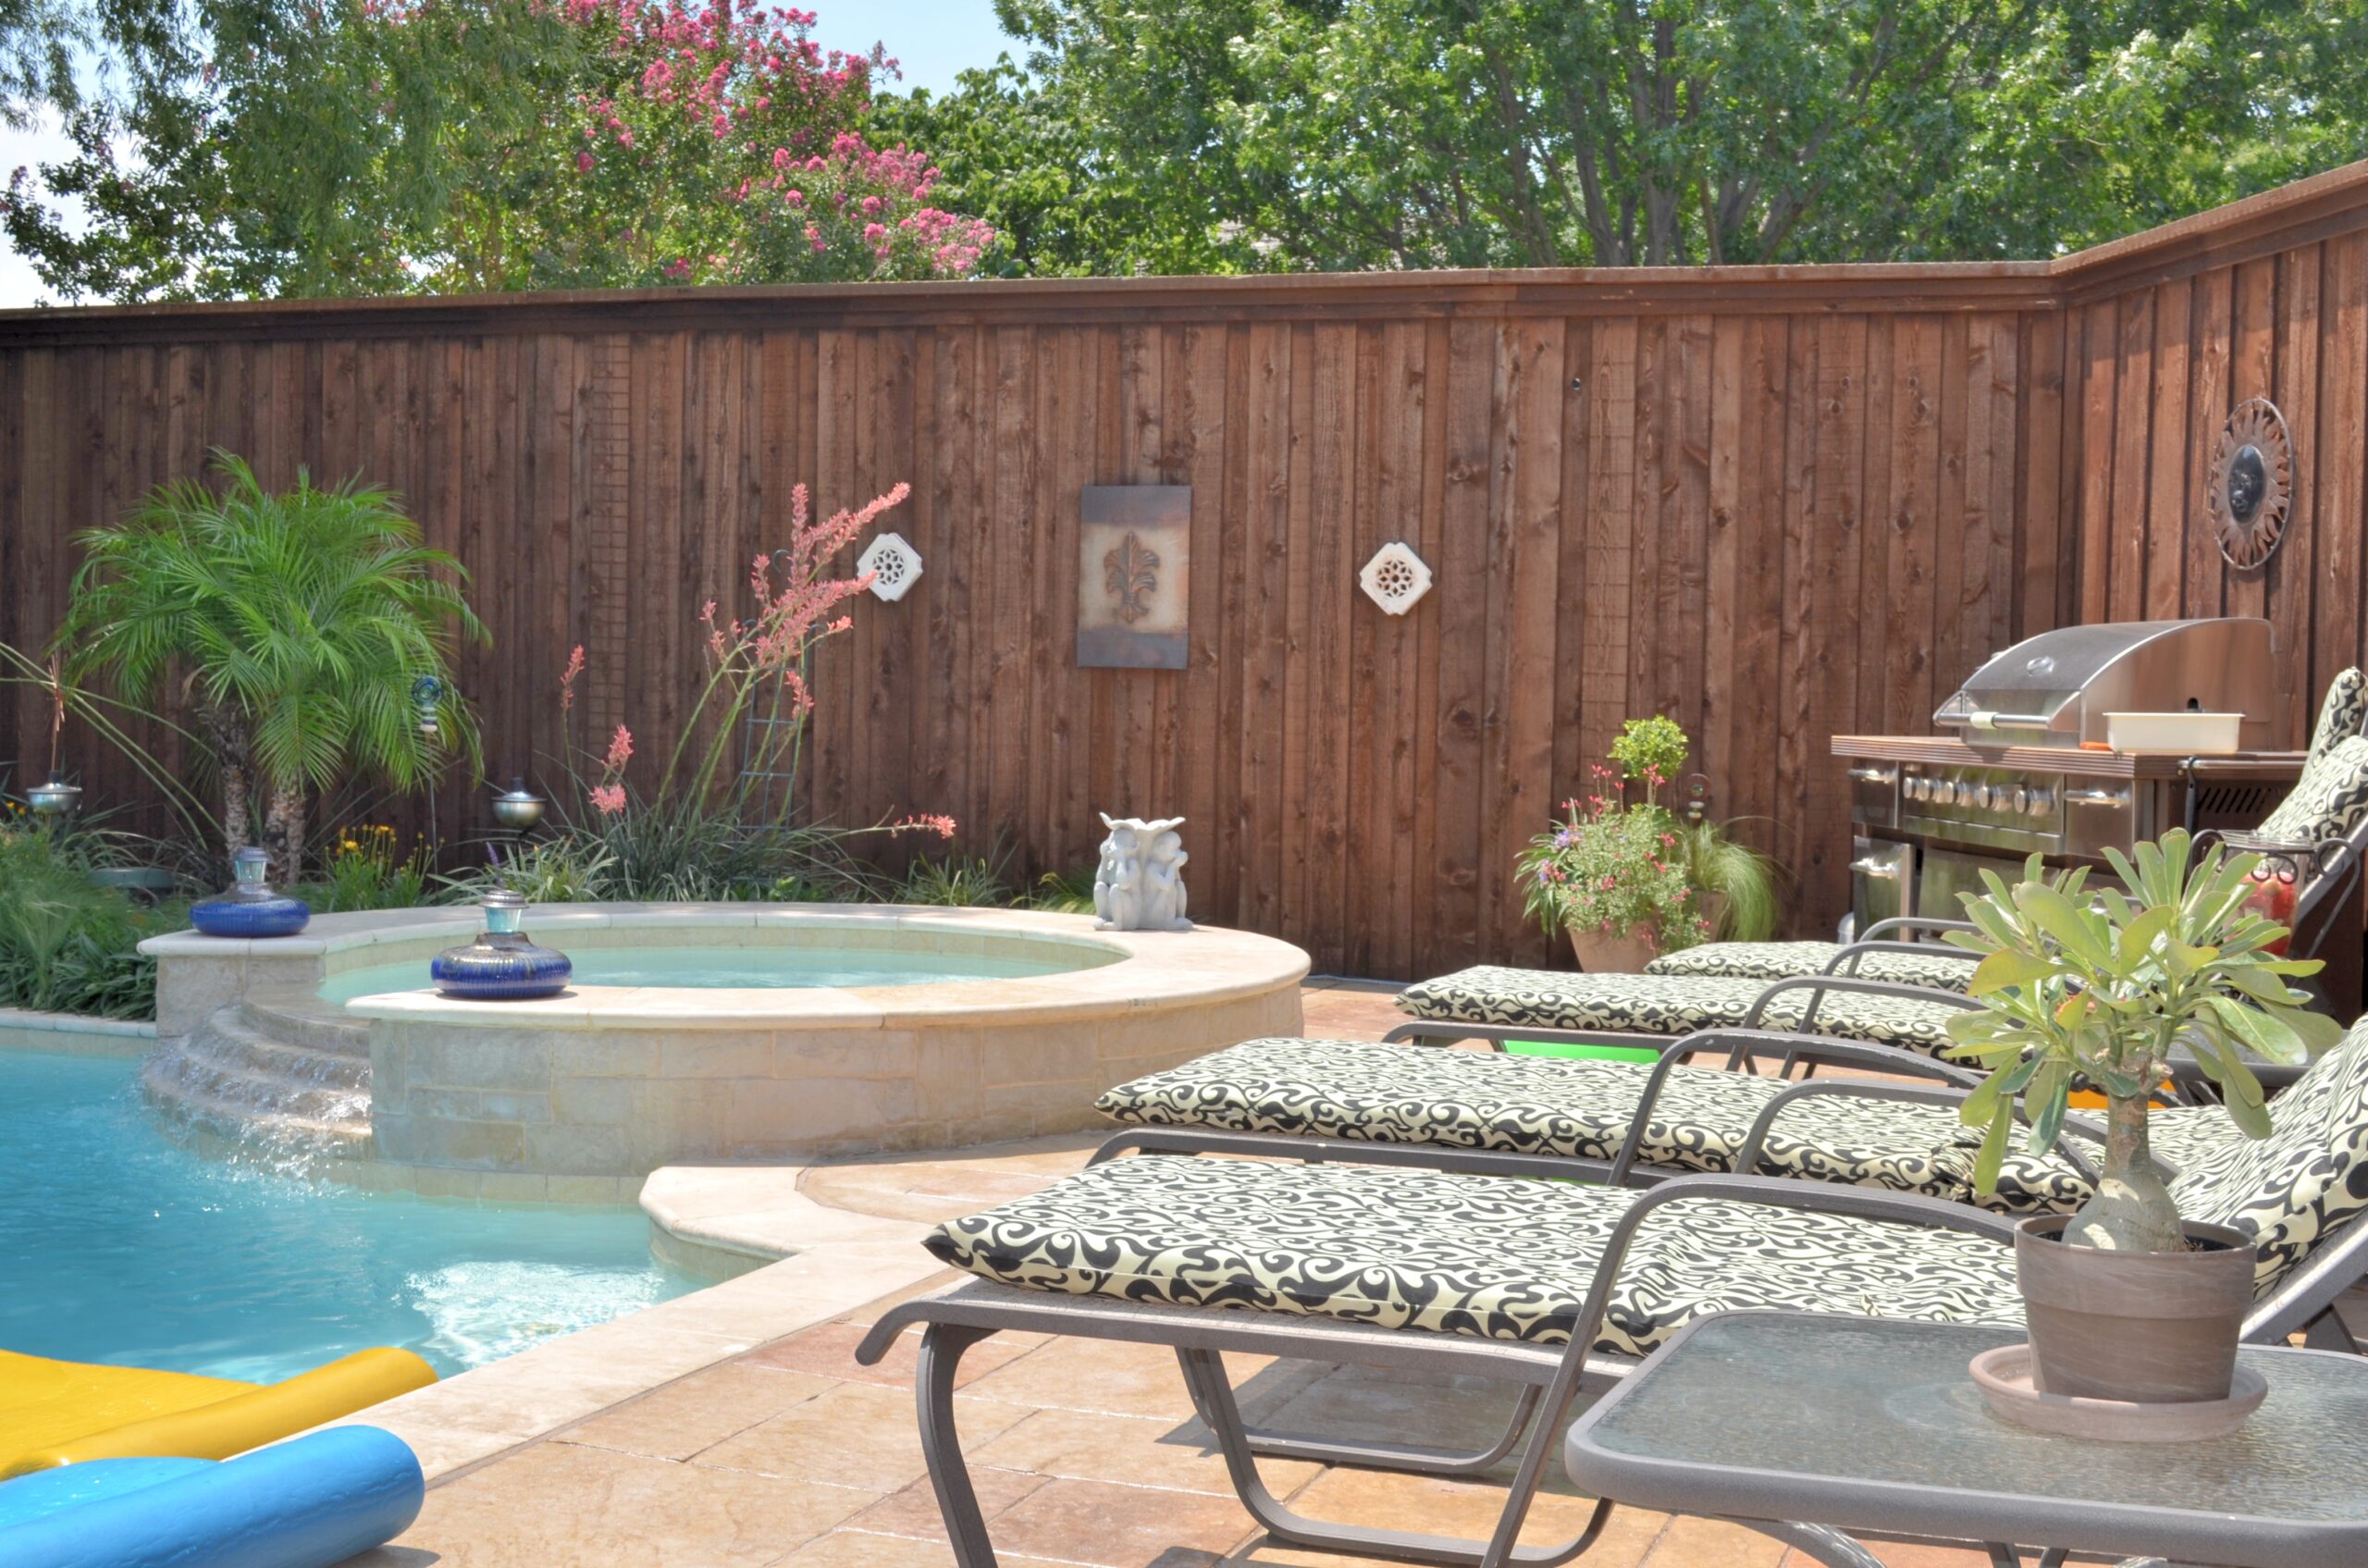 Poolside area with metal chairs featuring foam cushions